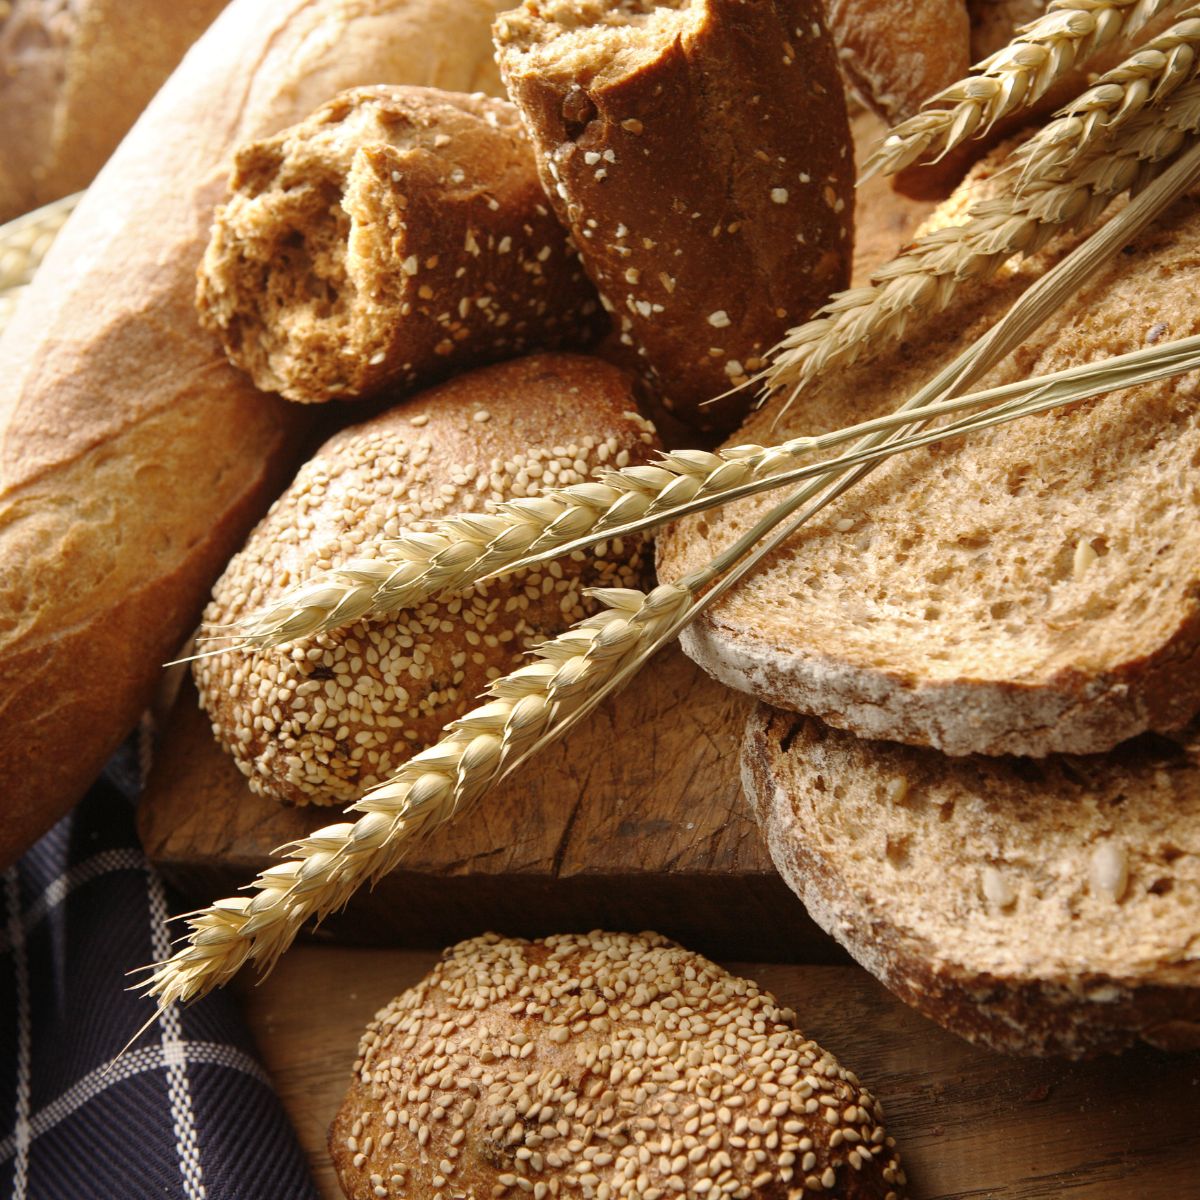 Types Of Bread: Varieties Of Bread From Around The World